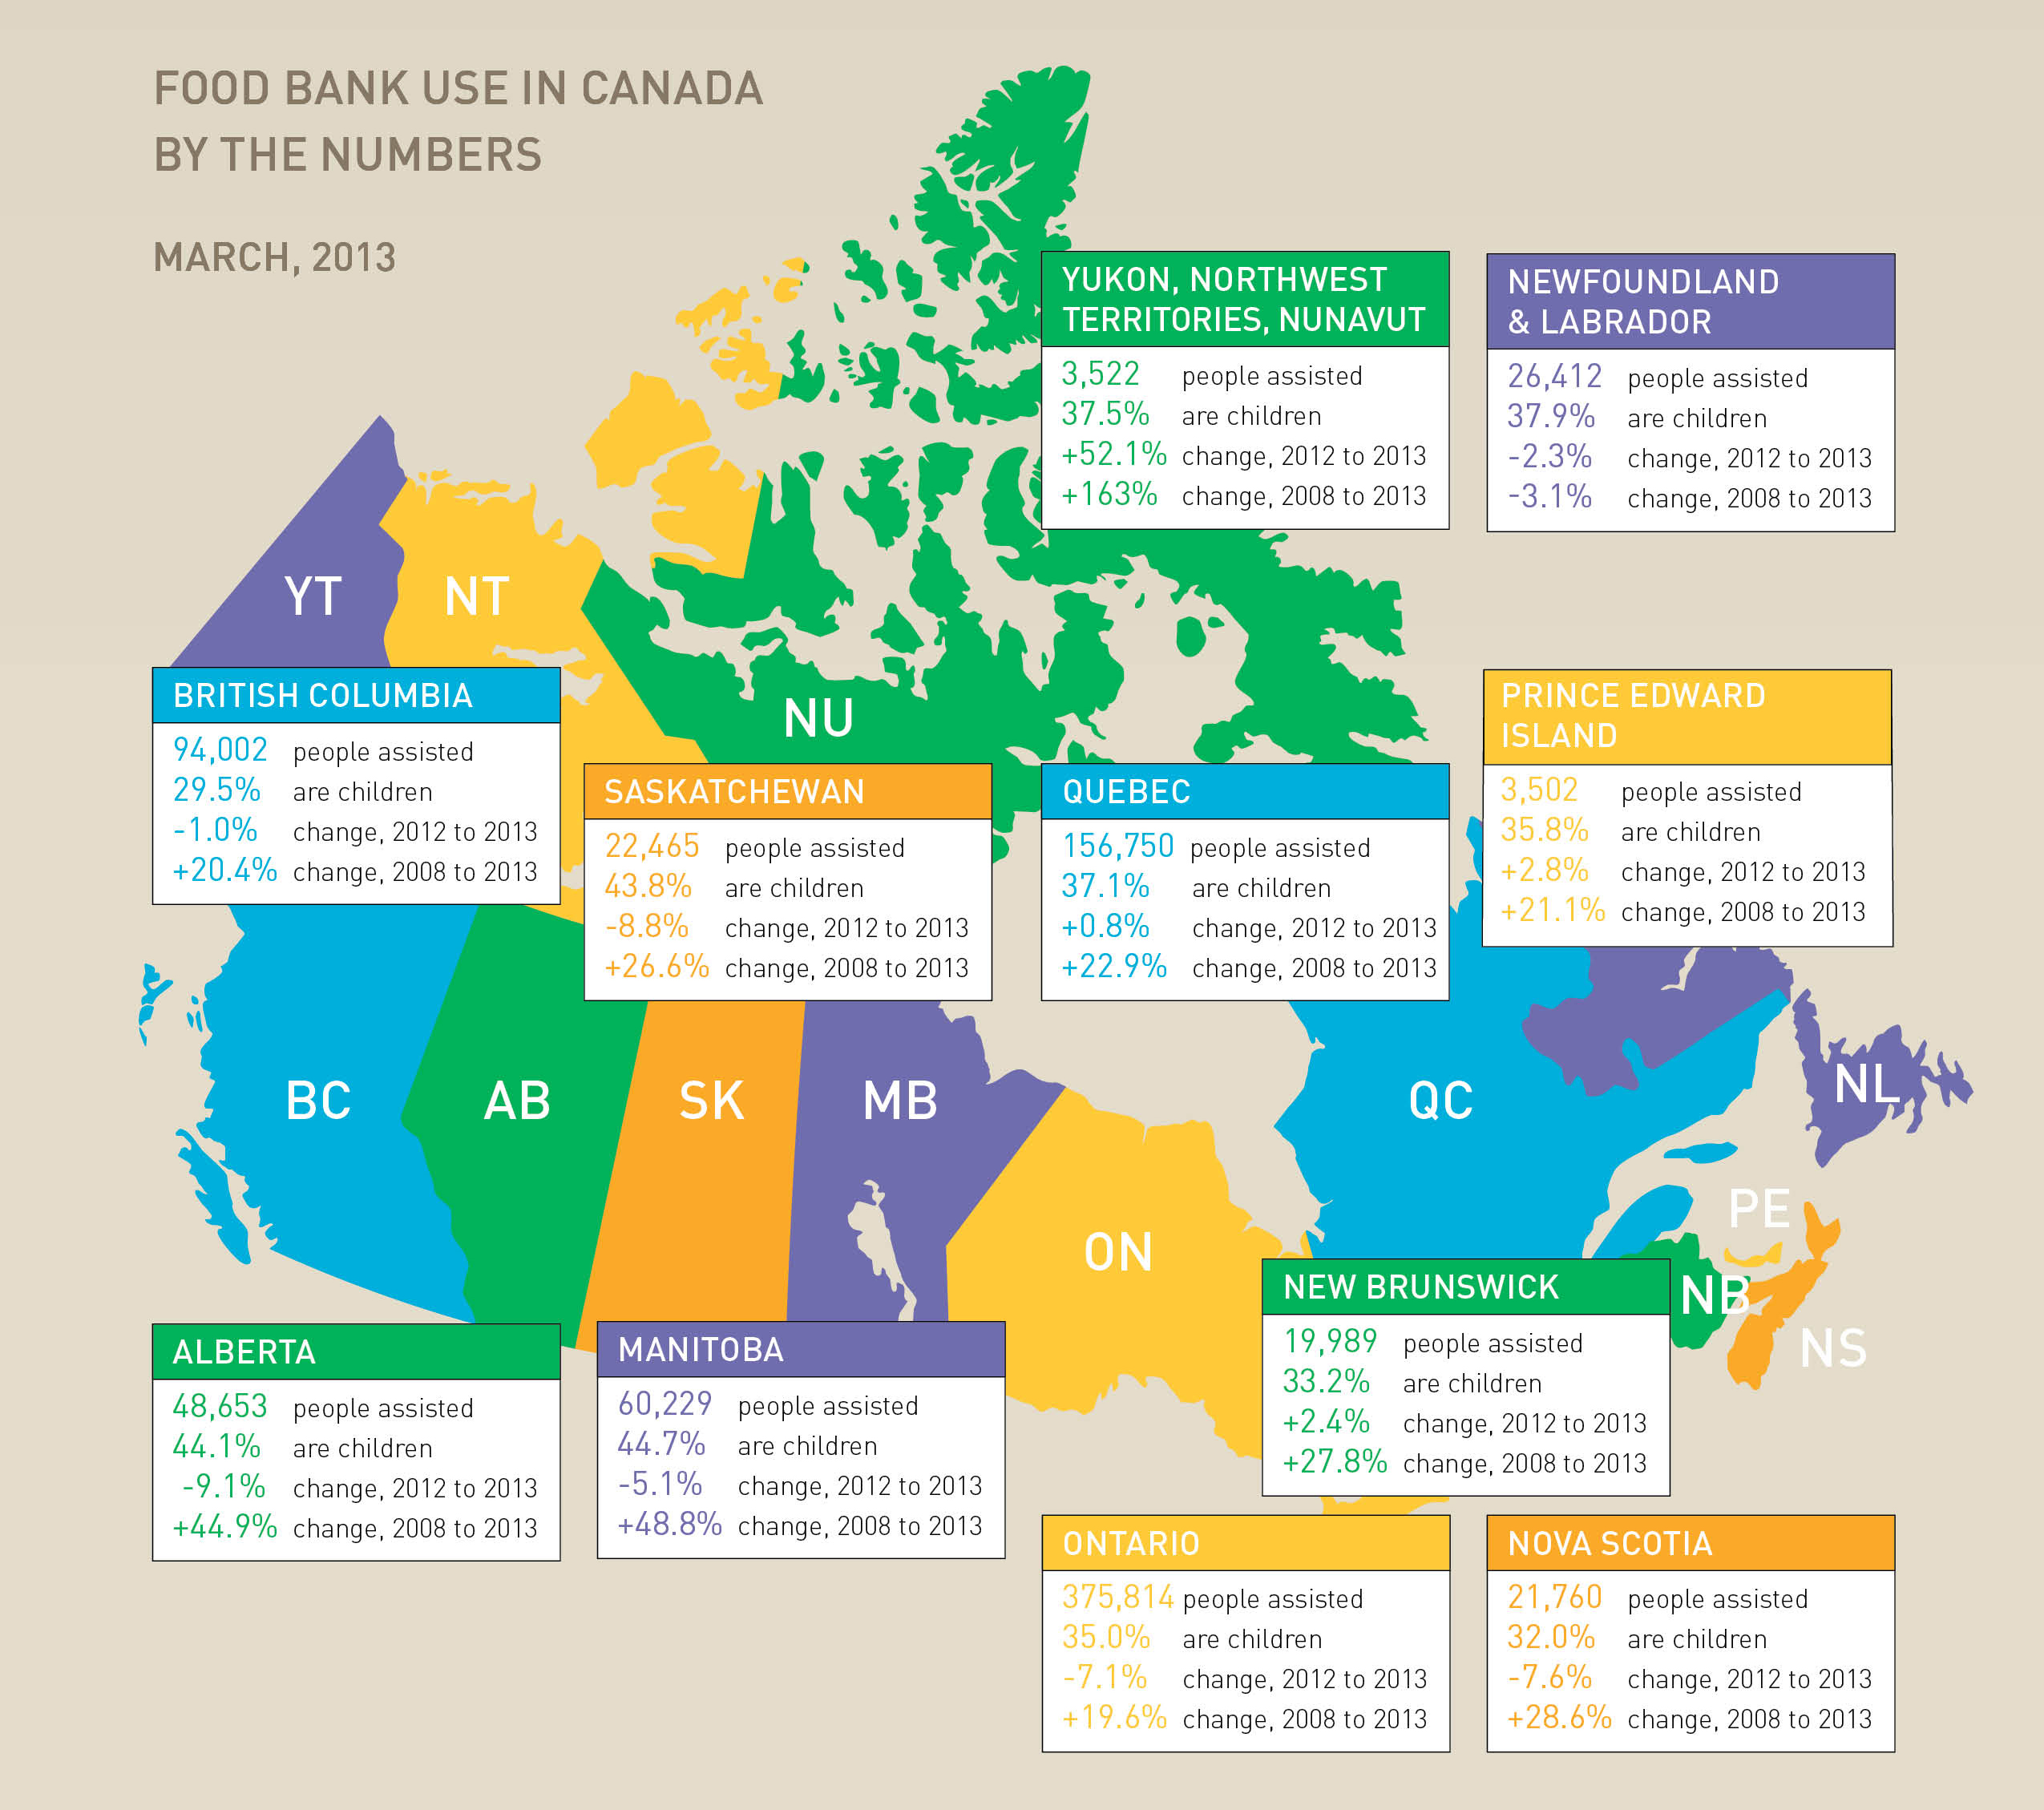 Food Bank Use in Canada by the Numbers, 2013